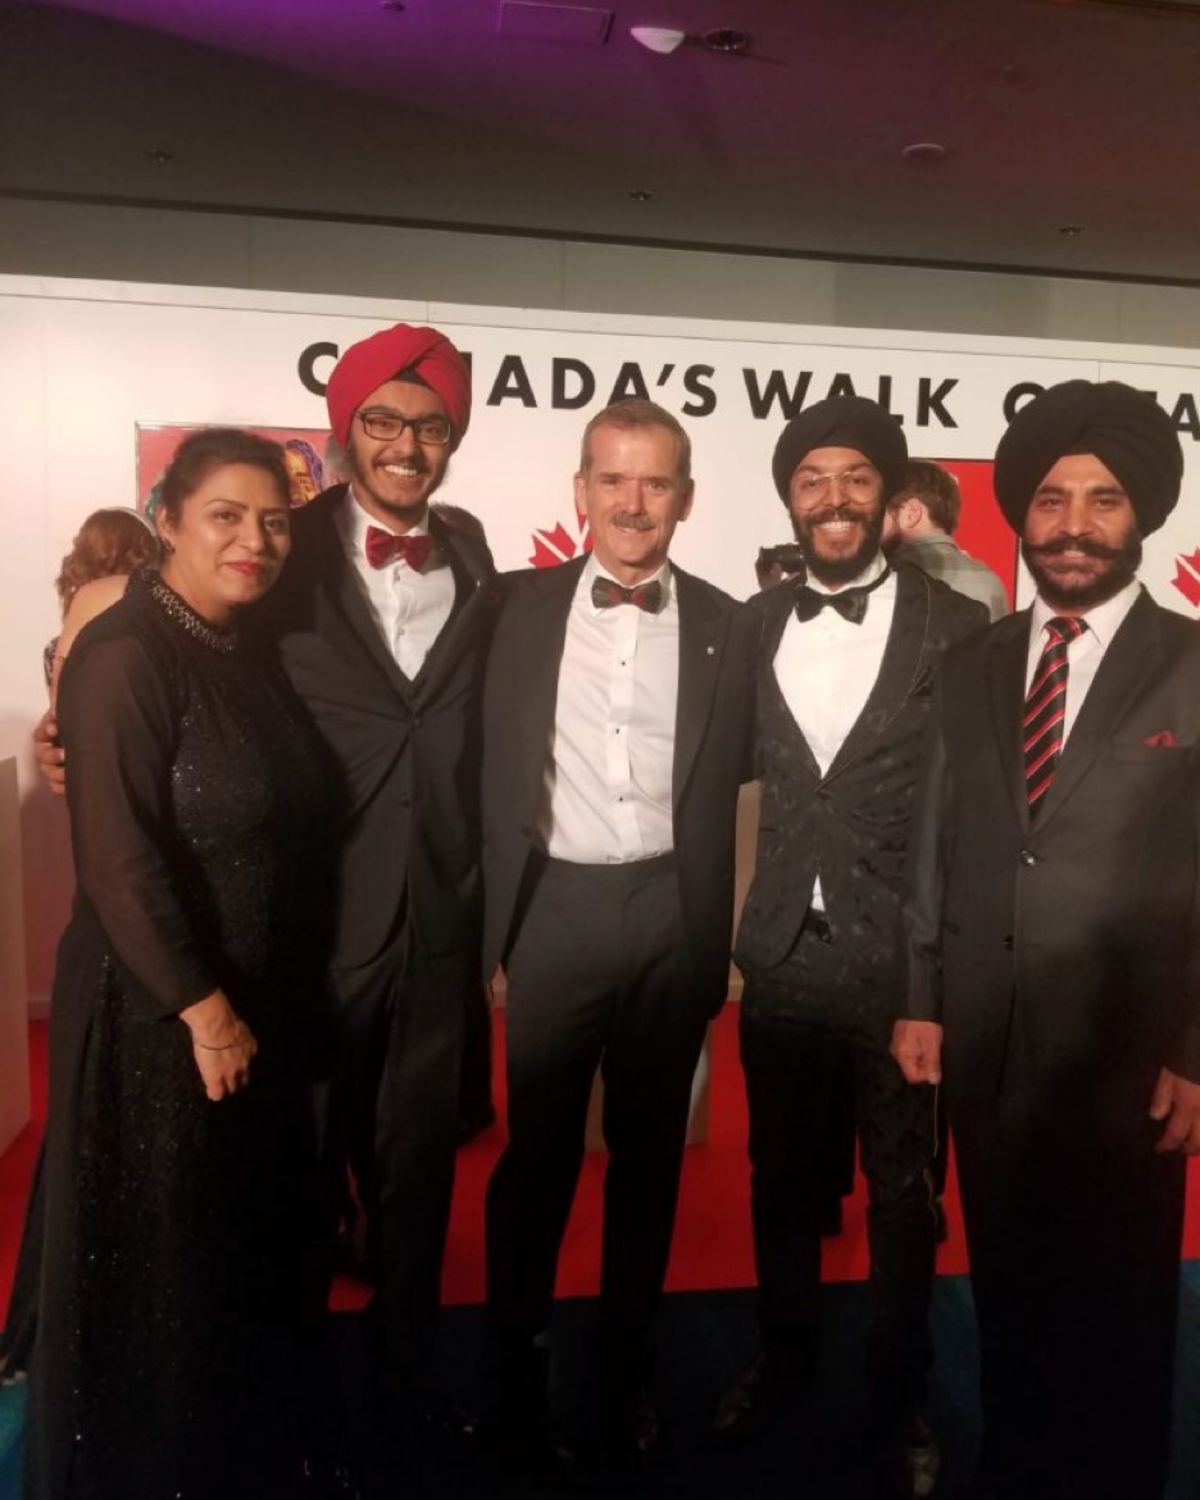 Abhayjeet Singh Sachal and his family meeting Chris Hadfield, all in evening wear.